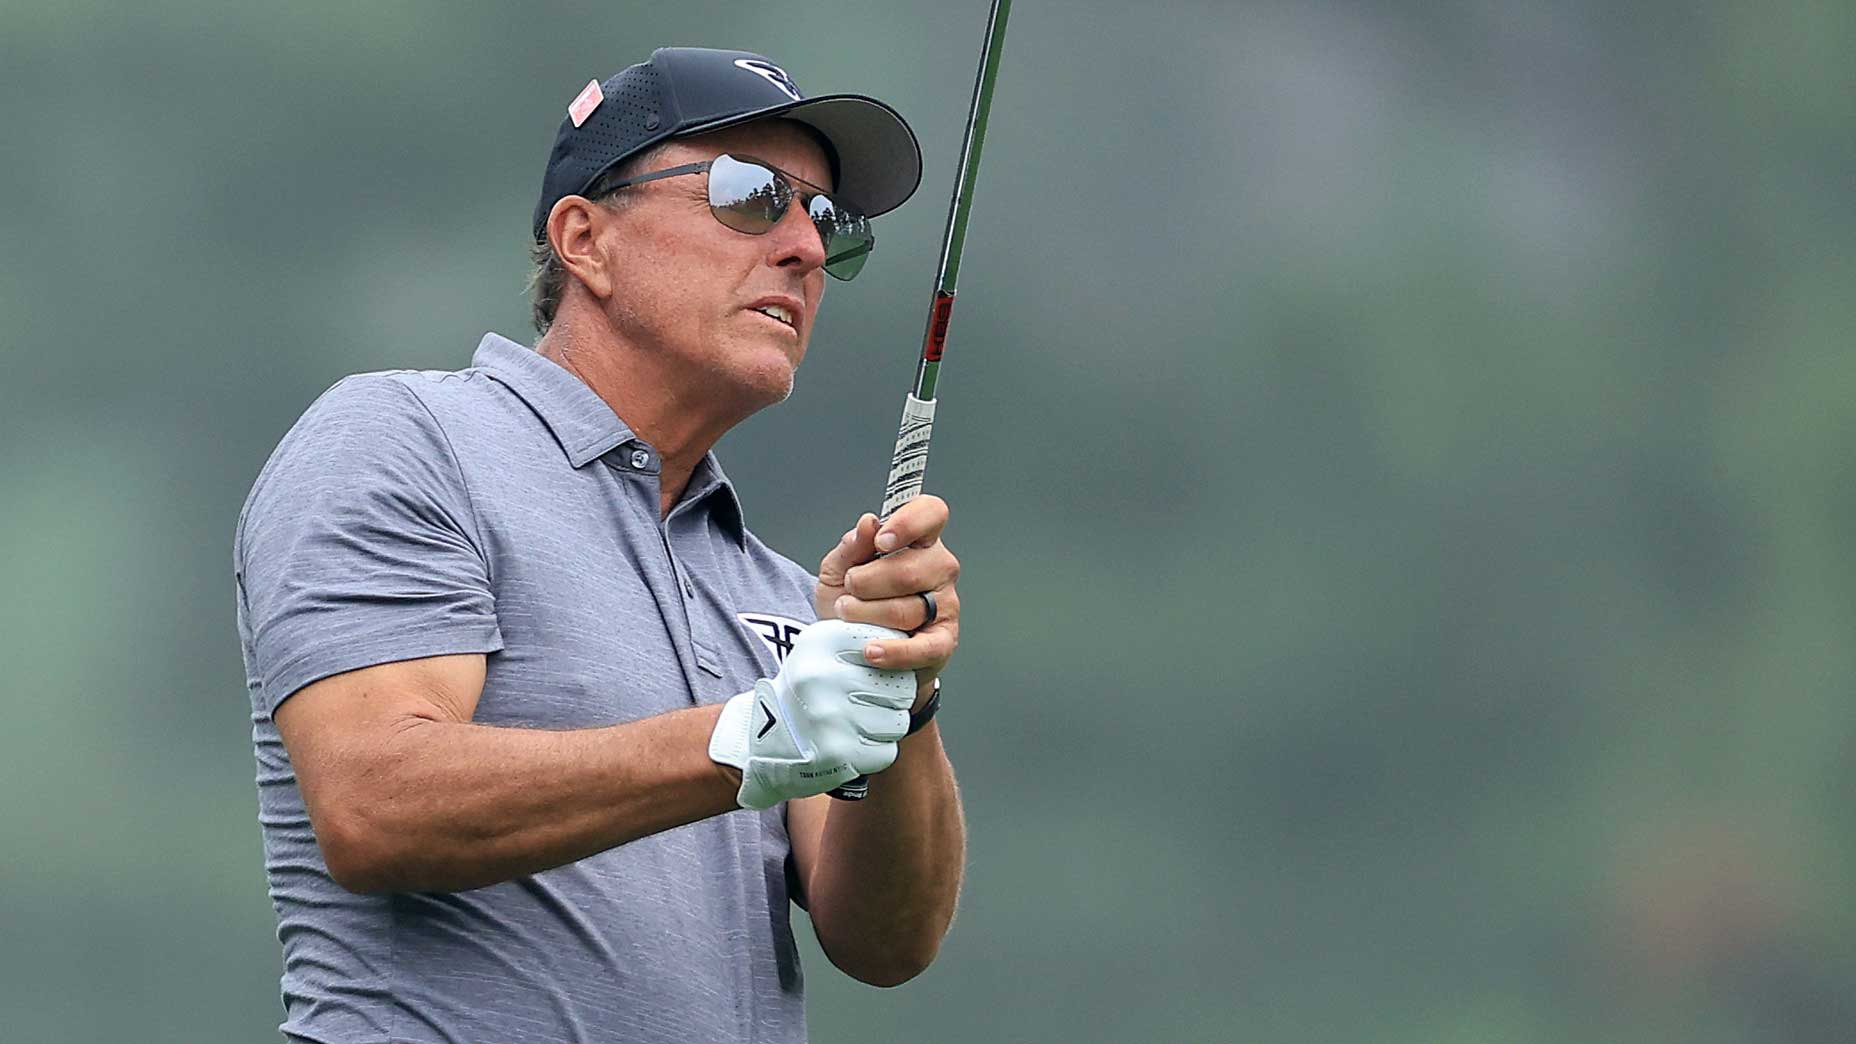 5 Phil Mickelsons are at the Masters this week. It’s been curious to